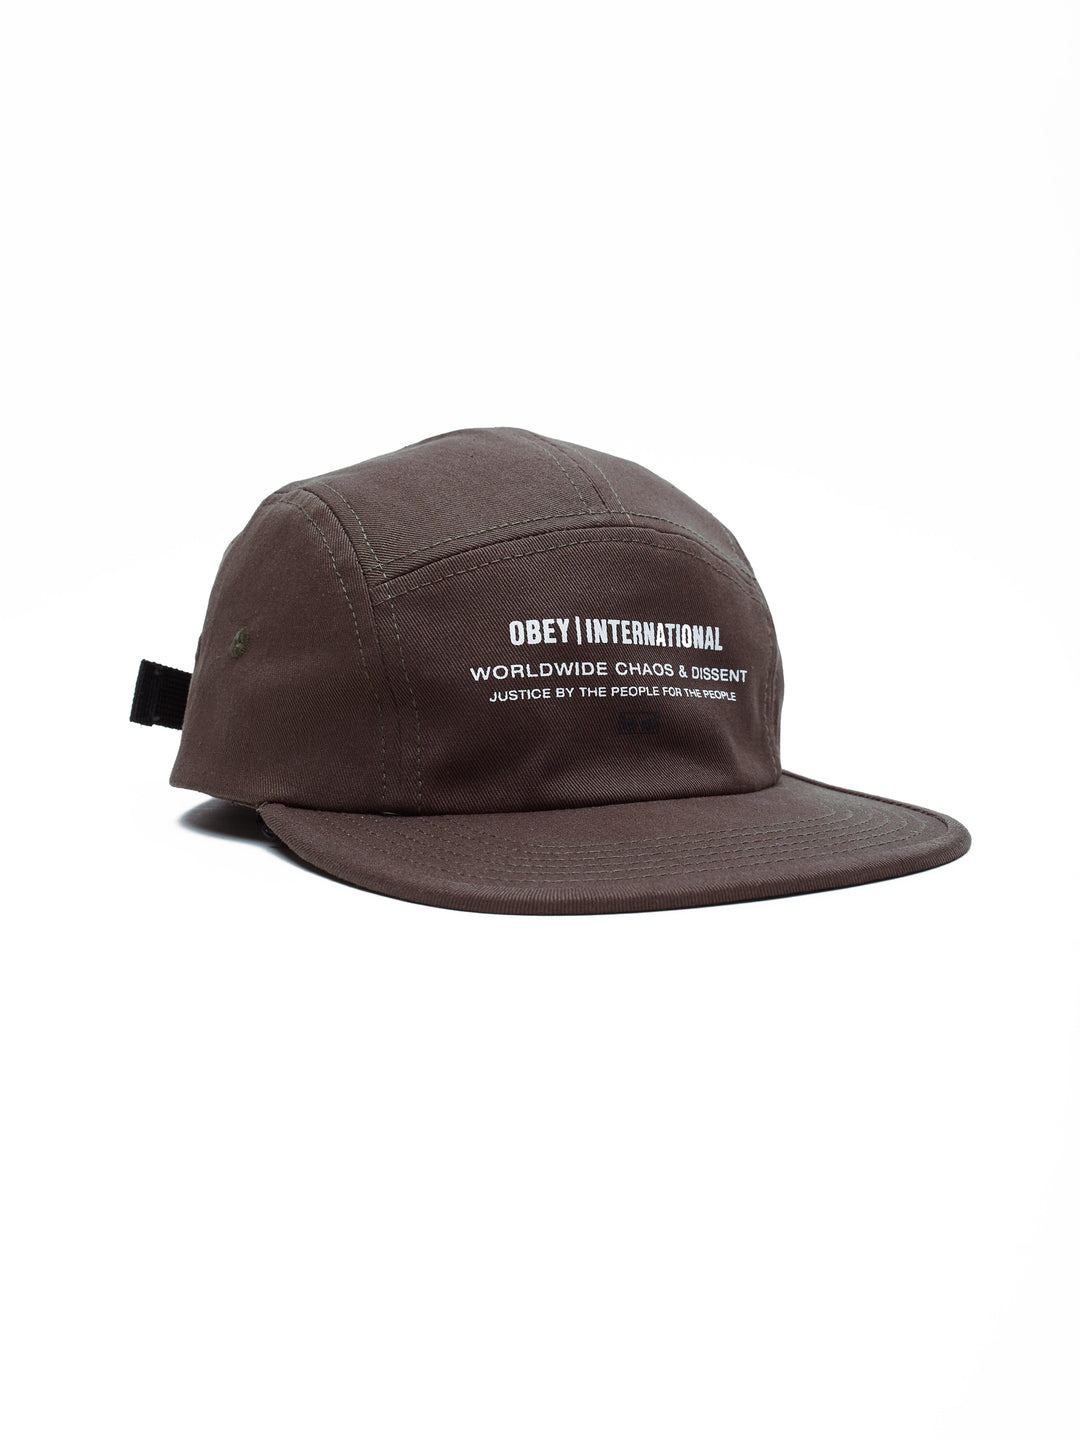 Integrity 5 Panel Hat / Army - West of Camden - Main Image Number 1 of 2